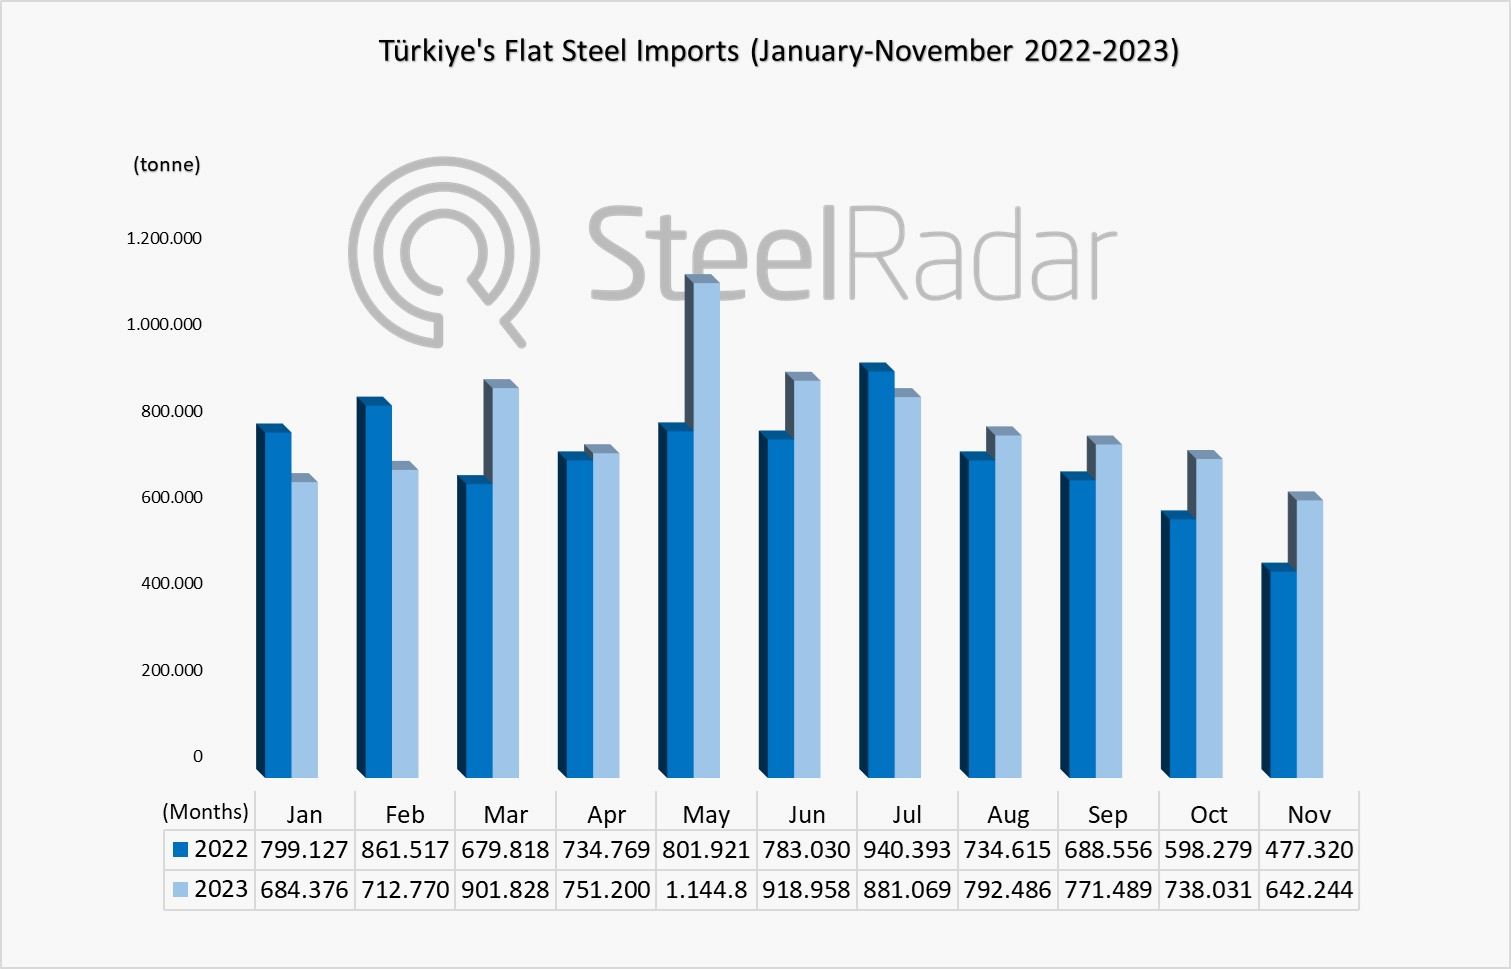 Türkiye's flat steel imports increased by 34.56% in November, while annual imports recorded lowest level